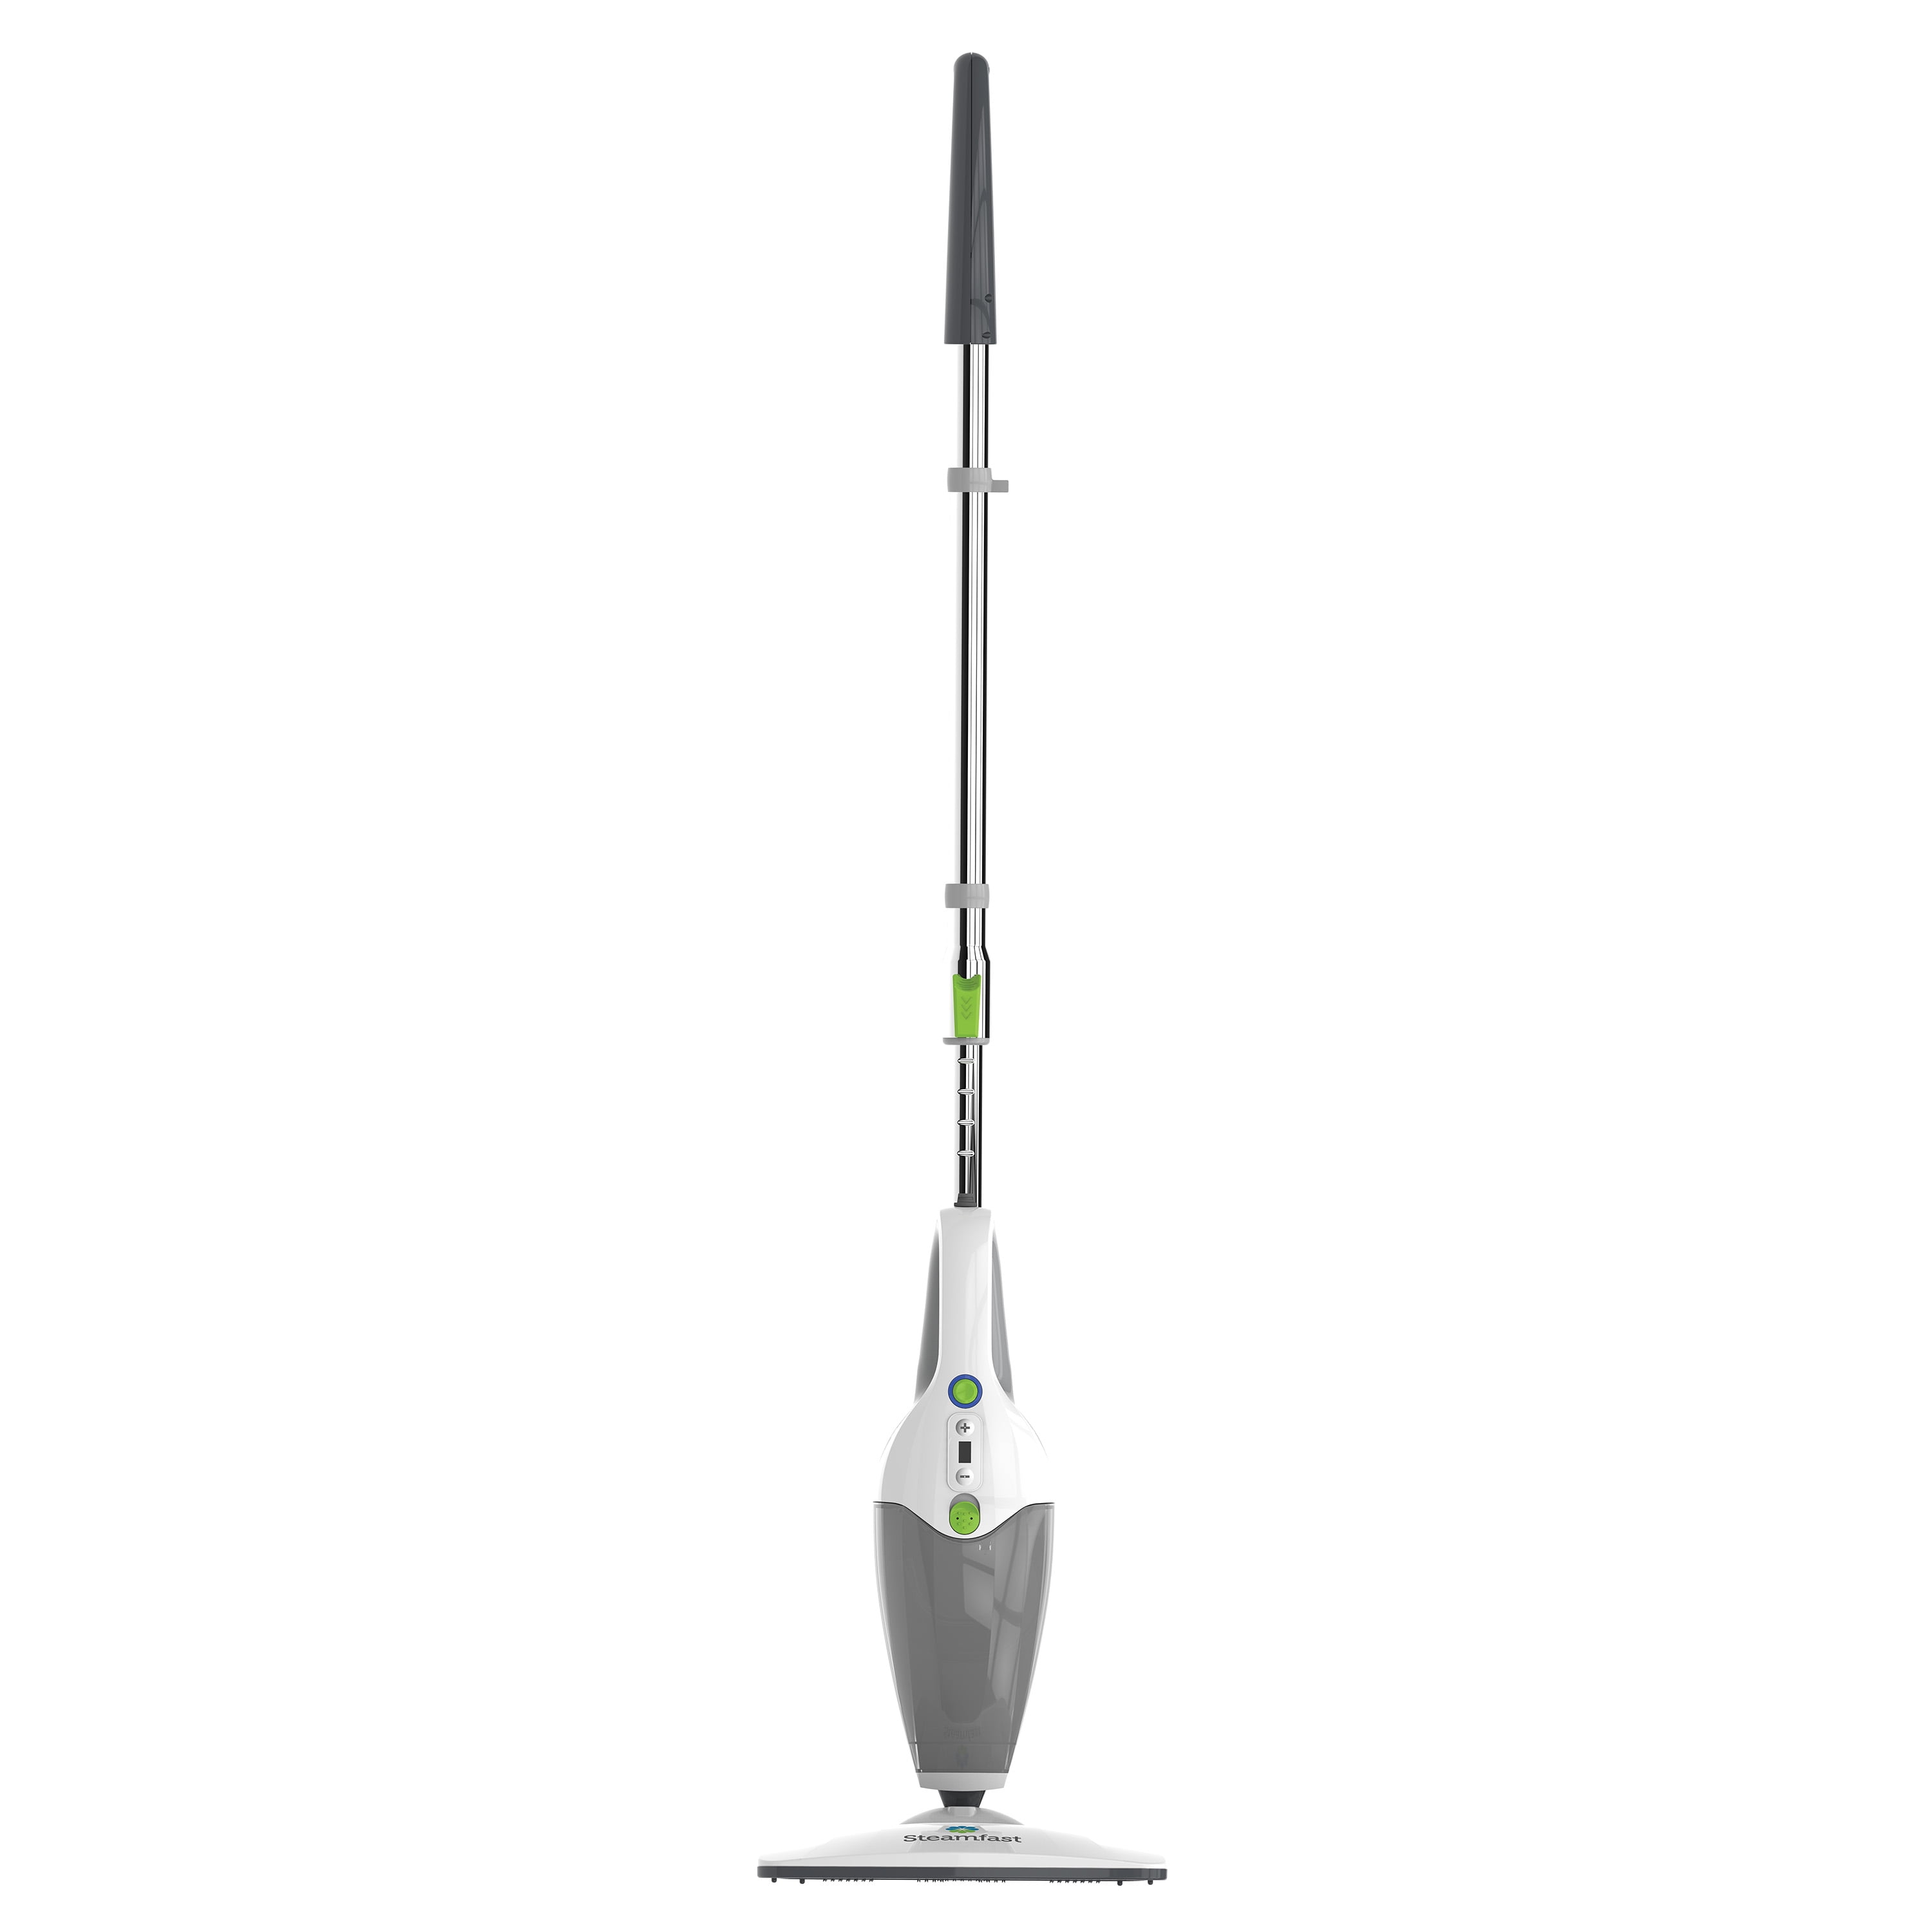 Reliable 300CU Steam Floor Mop - Steamboy Pro Electric Steam Mop and Scrubber with 4 Microfiber Pads, 1500W, Steam Cleaner for Tile, Grout, Hardwood